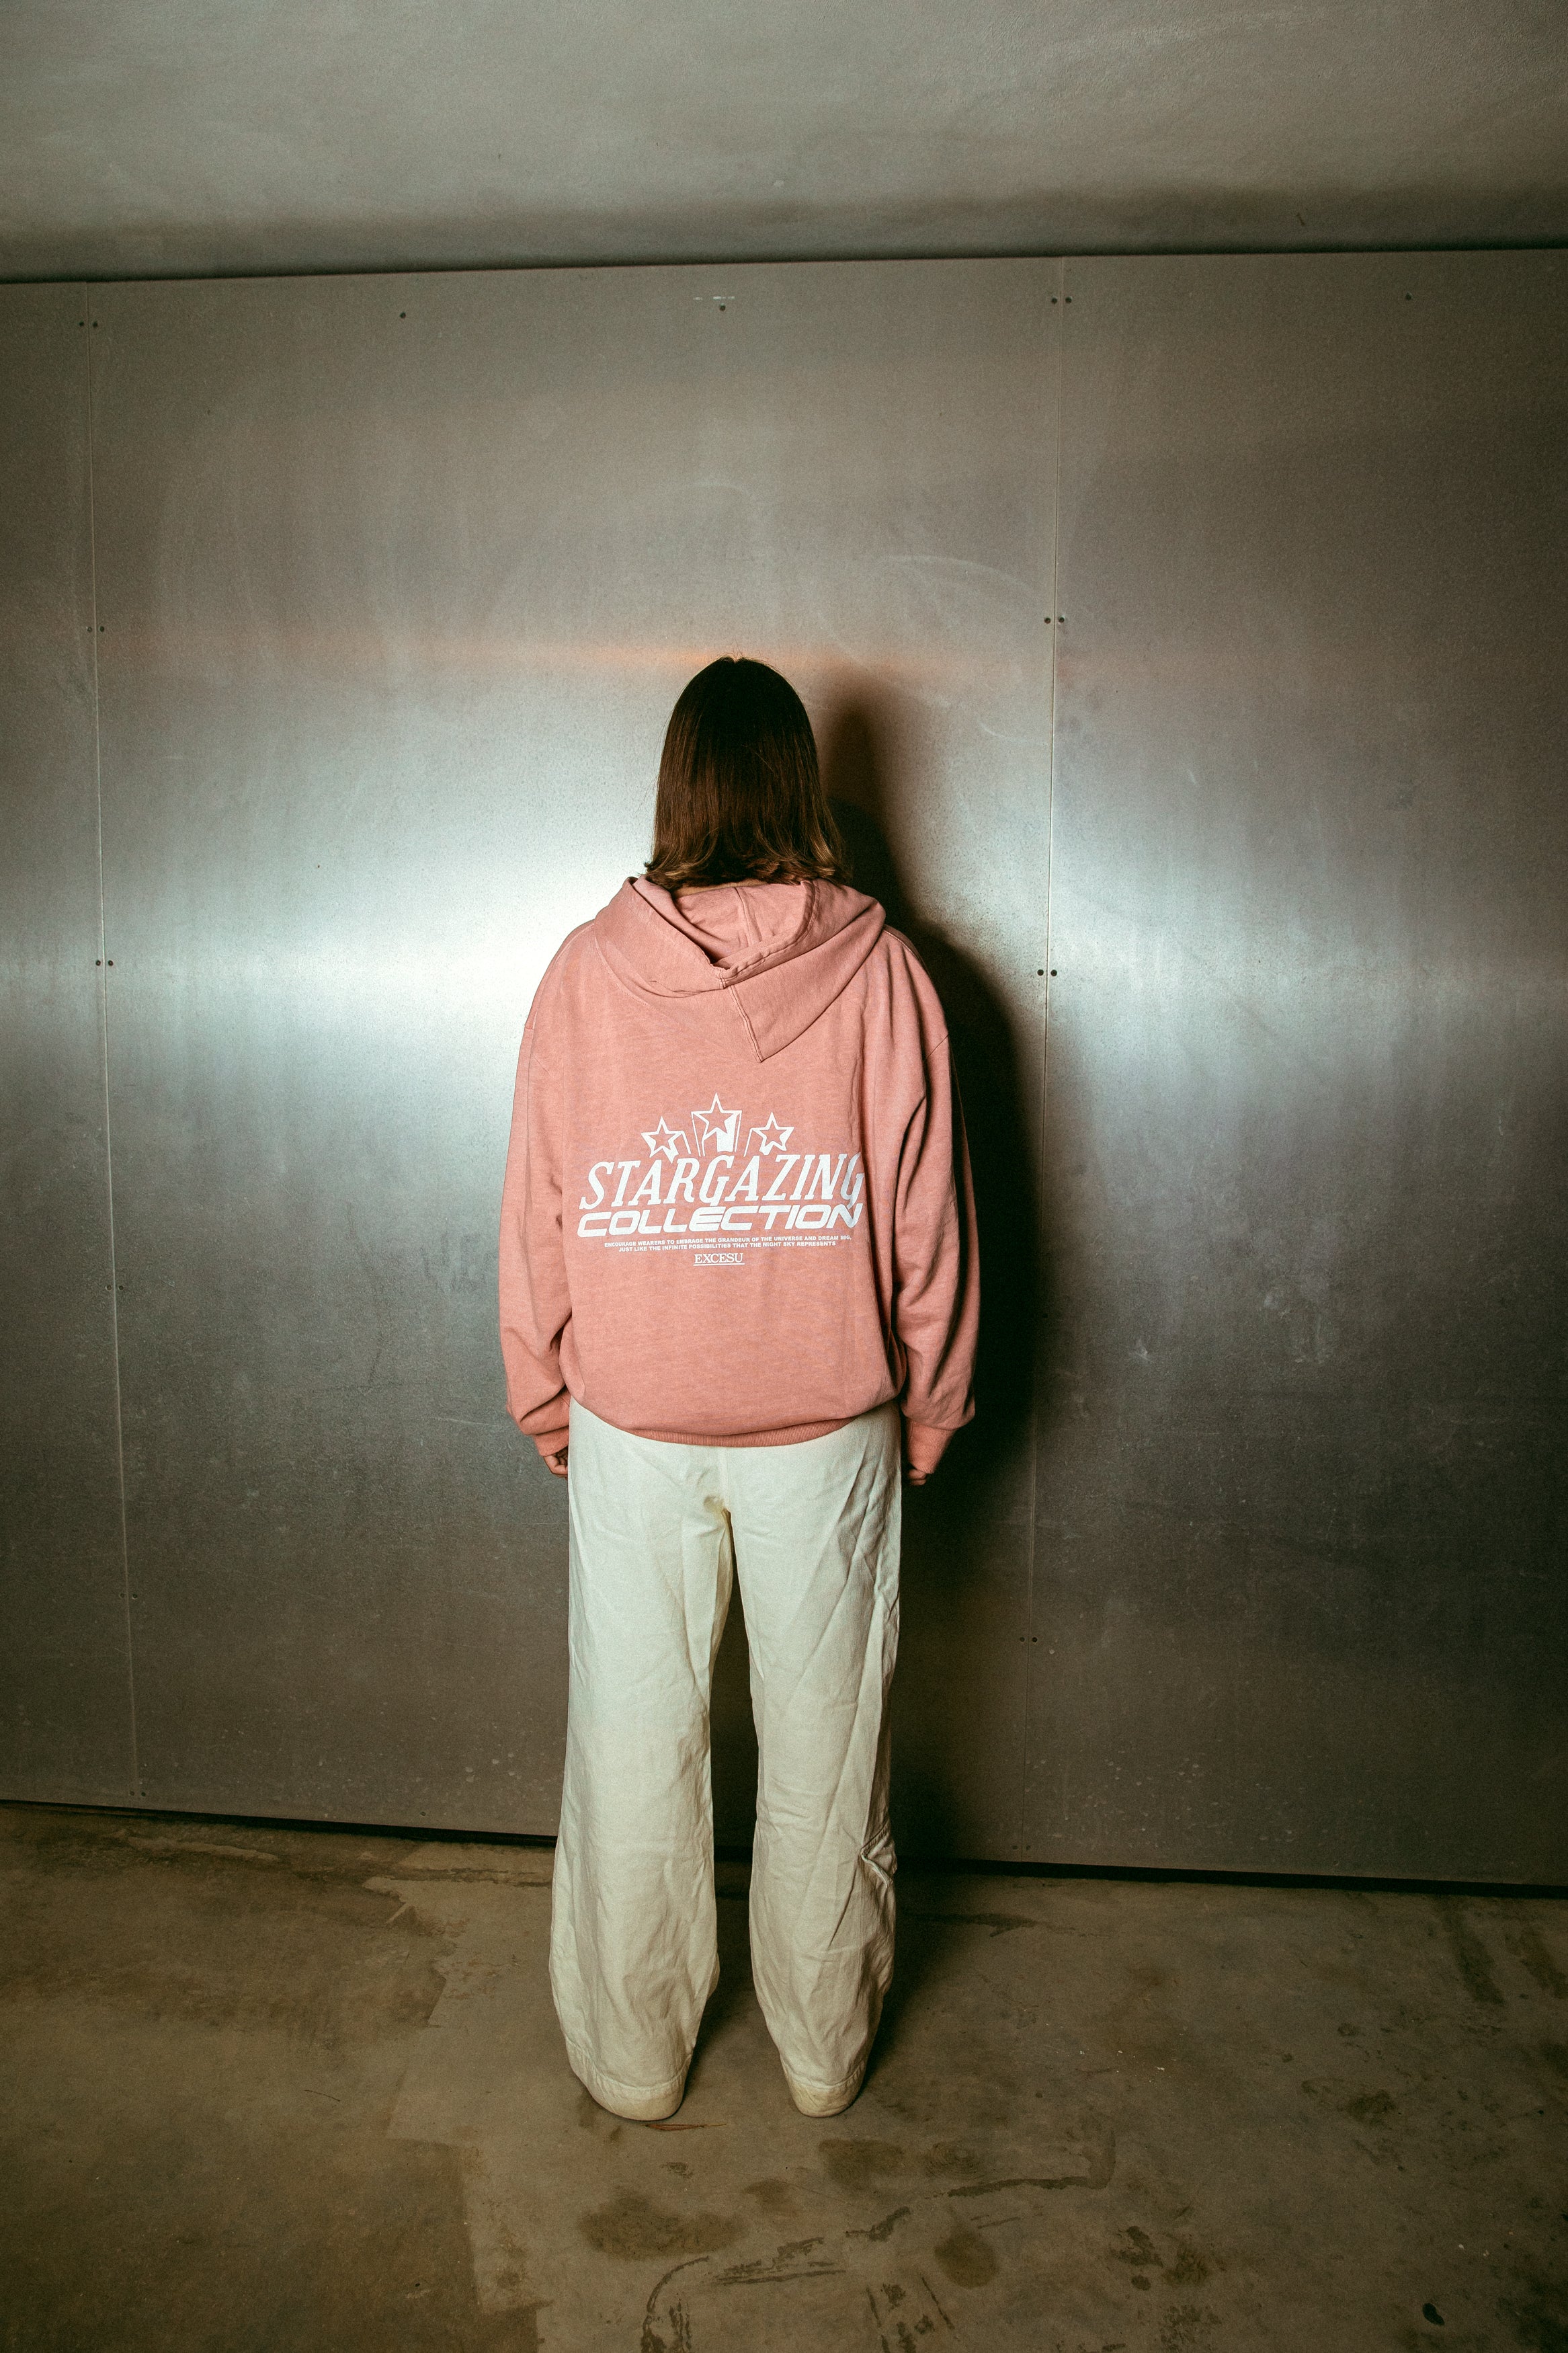 STARGAZING COLLECTION PINK OVERSIZED HOODIE Excesu